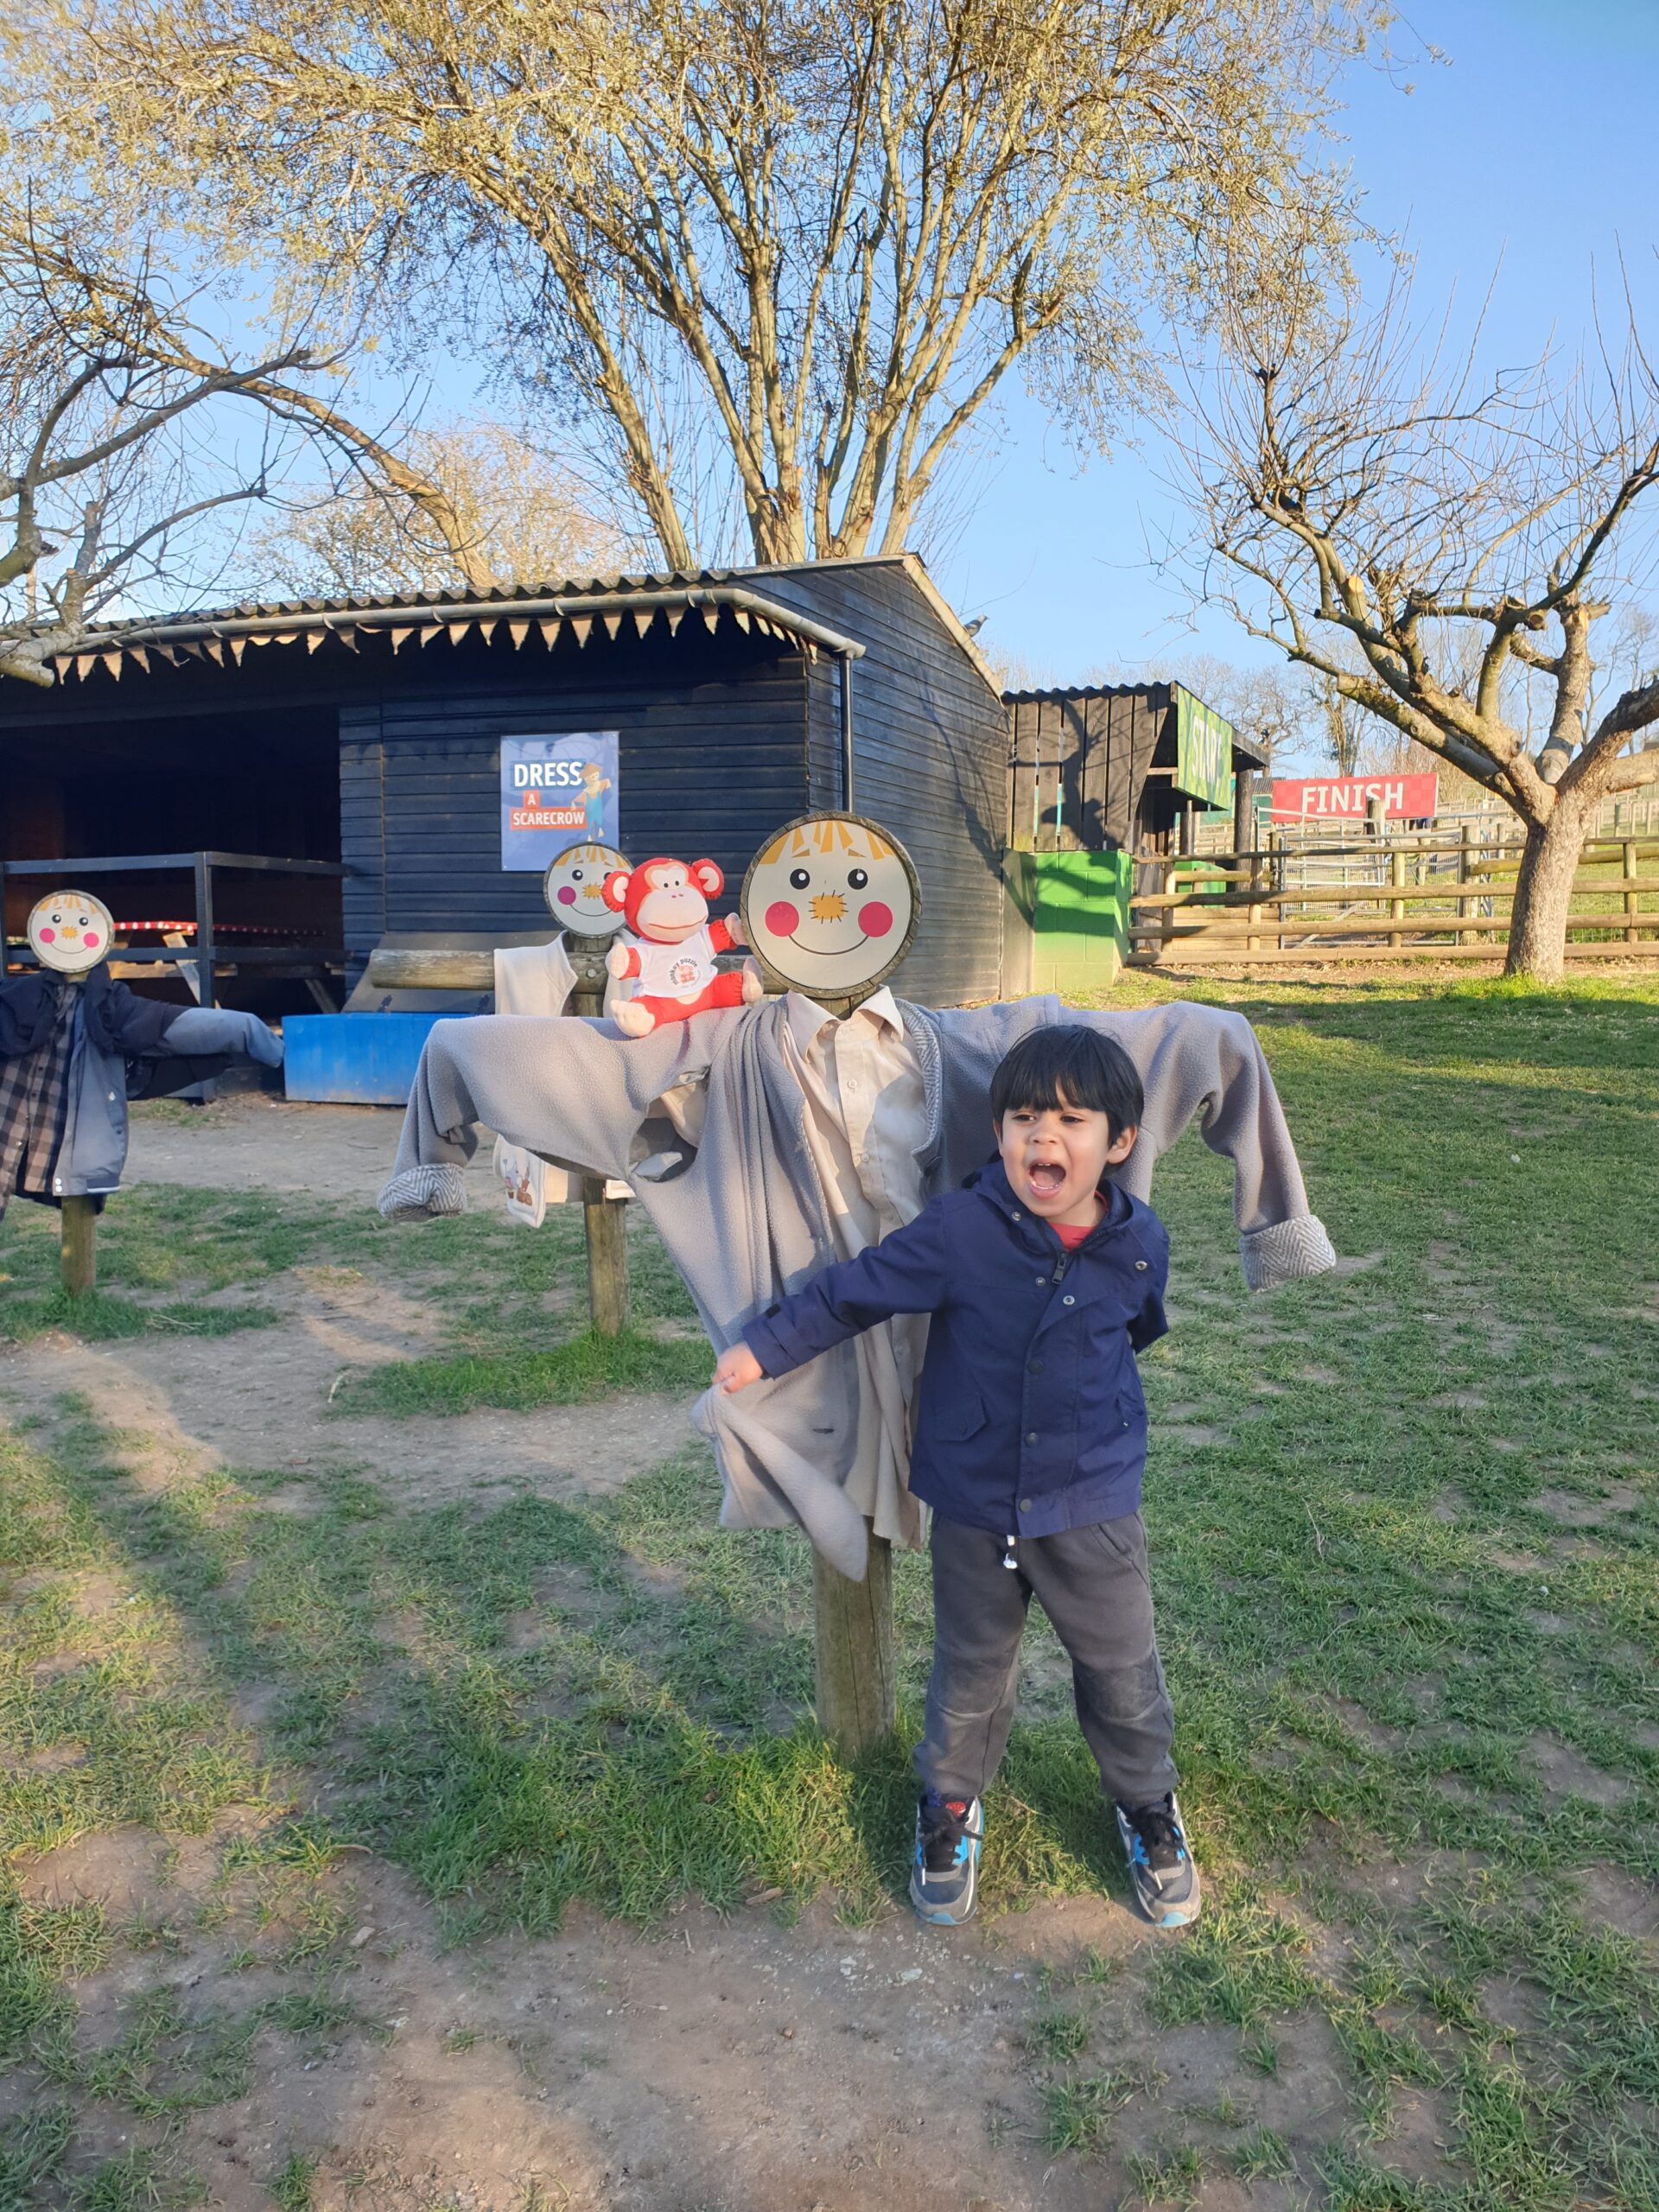 Marvin and his friend visiting the farm